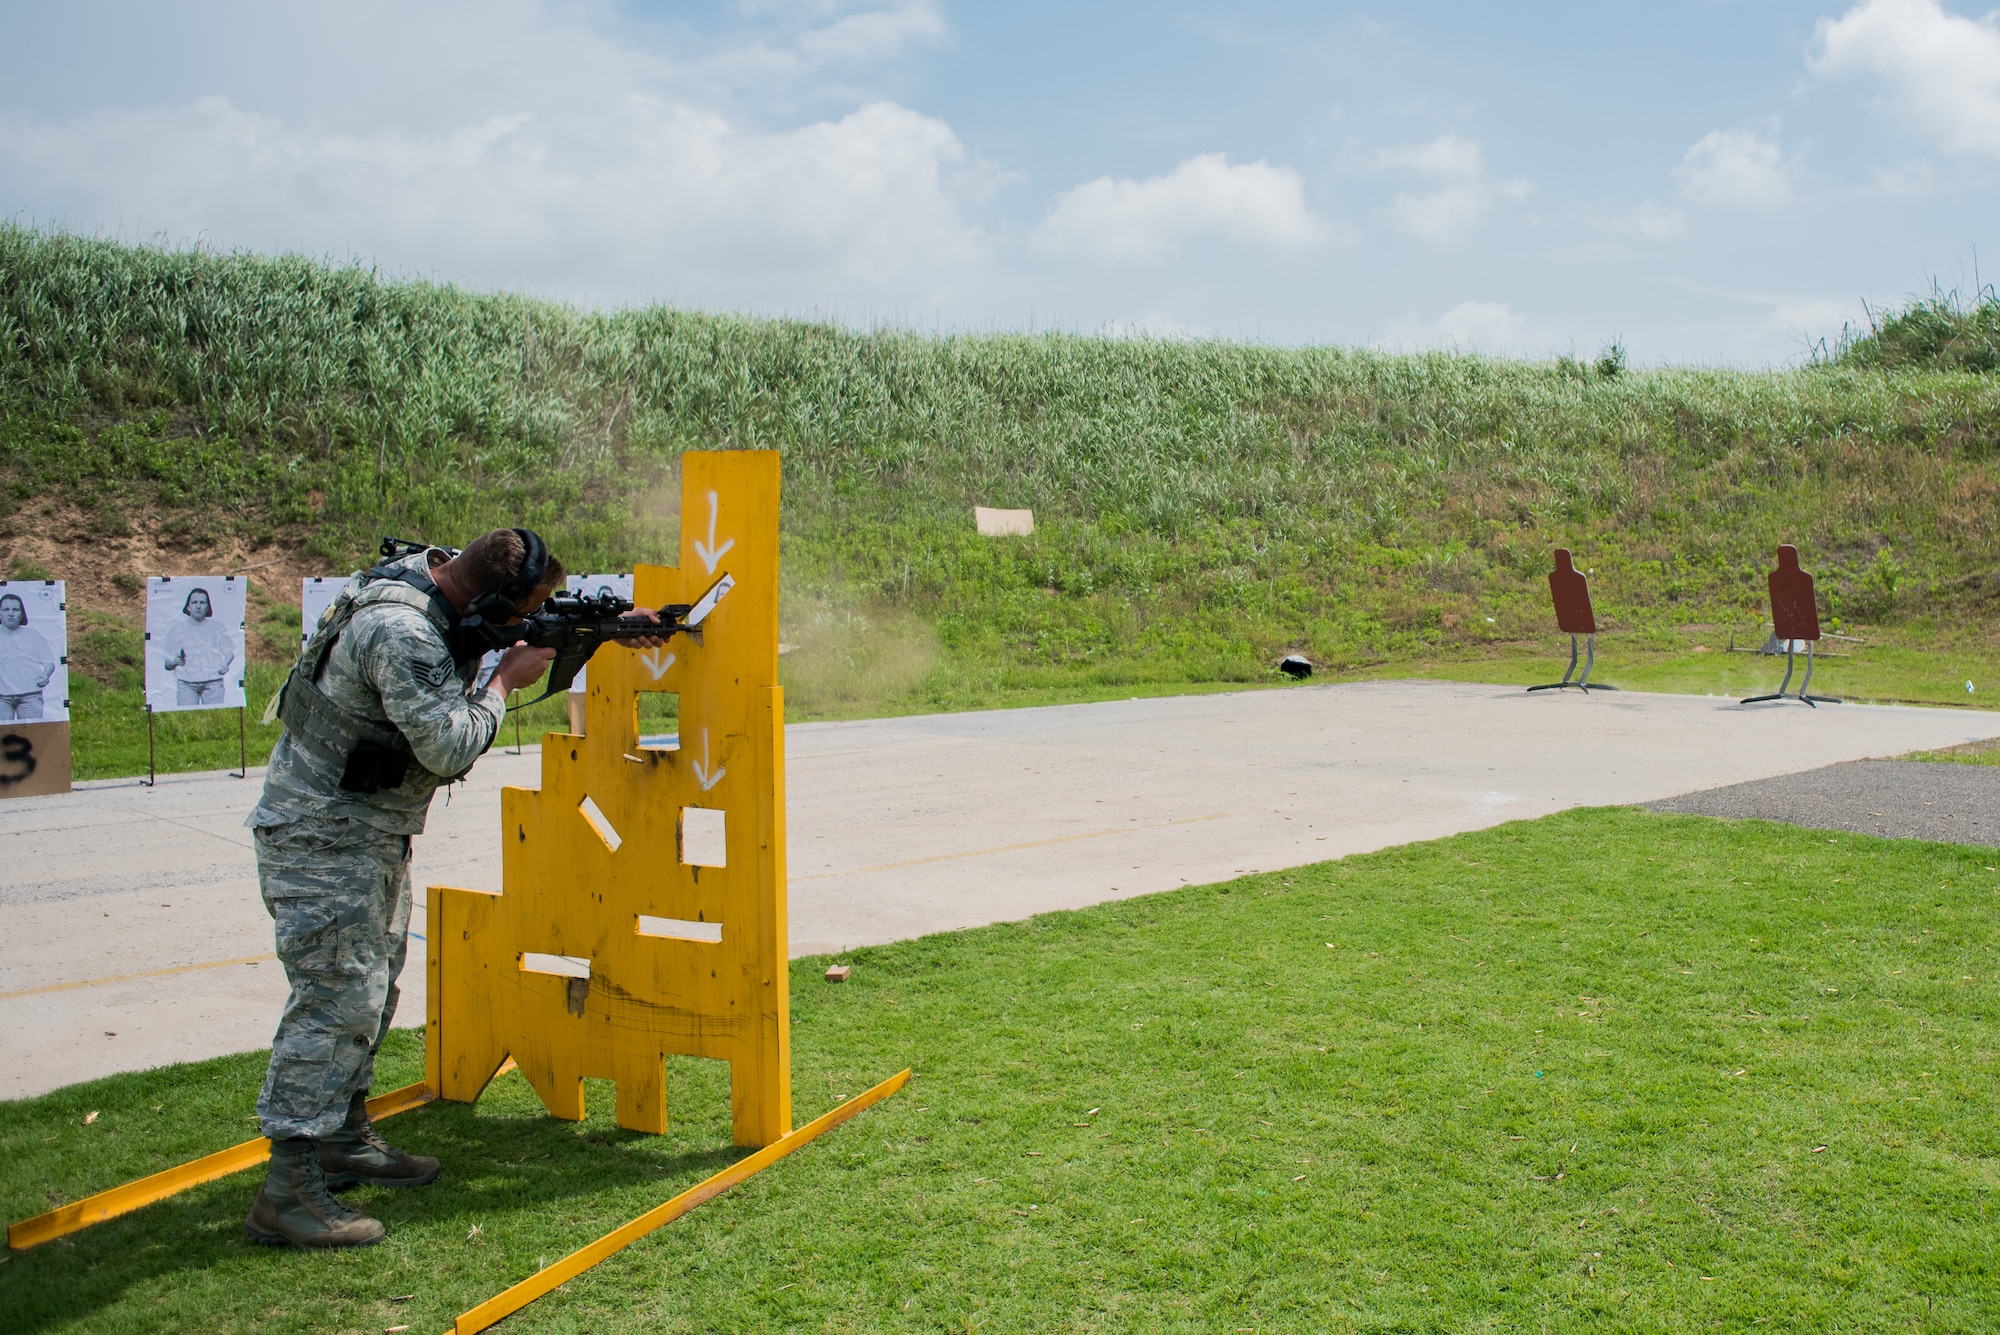 Staff Sgt. Luke Wagner, a member of the 137th Security Forces Squadron, Will Rogers Air National Guard Base, Oklahoma City, demonstrated proper technique of firing a weapon while behind a barricade at the Oklahoma County Sheriff's Office Training Center in Oklahoma City, May 26, 2016. Wagner served as an assistant instructor for weapons training course during May 24-26. The Oklahoma Country Sheriff's Office led the training to enhance communication and compatibility between various Oklahoma law enforcement groups. (U.S. Air National Guard photo by Senior Airman Tyler Woodward)